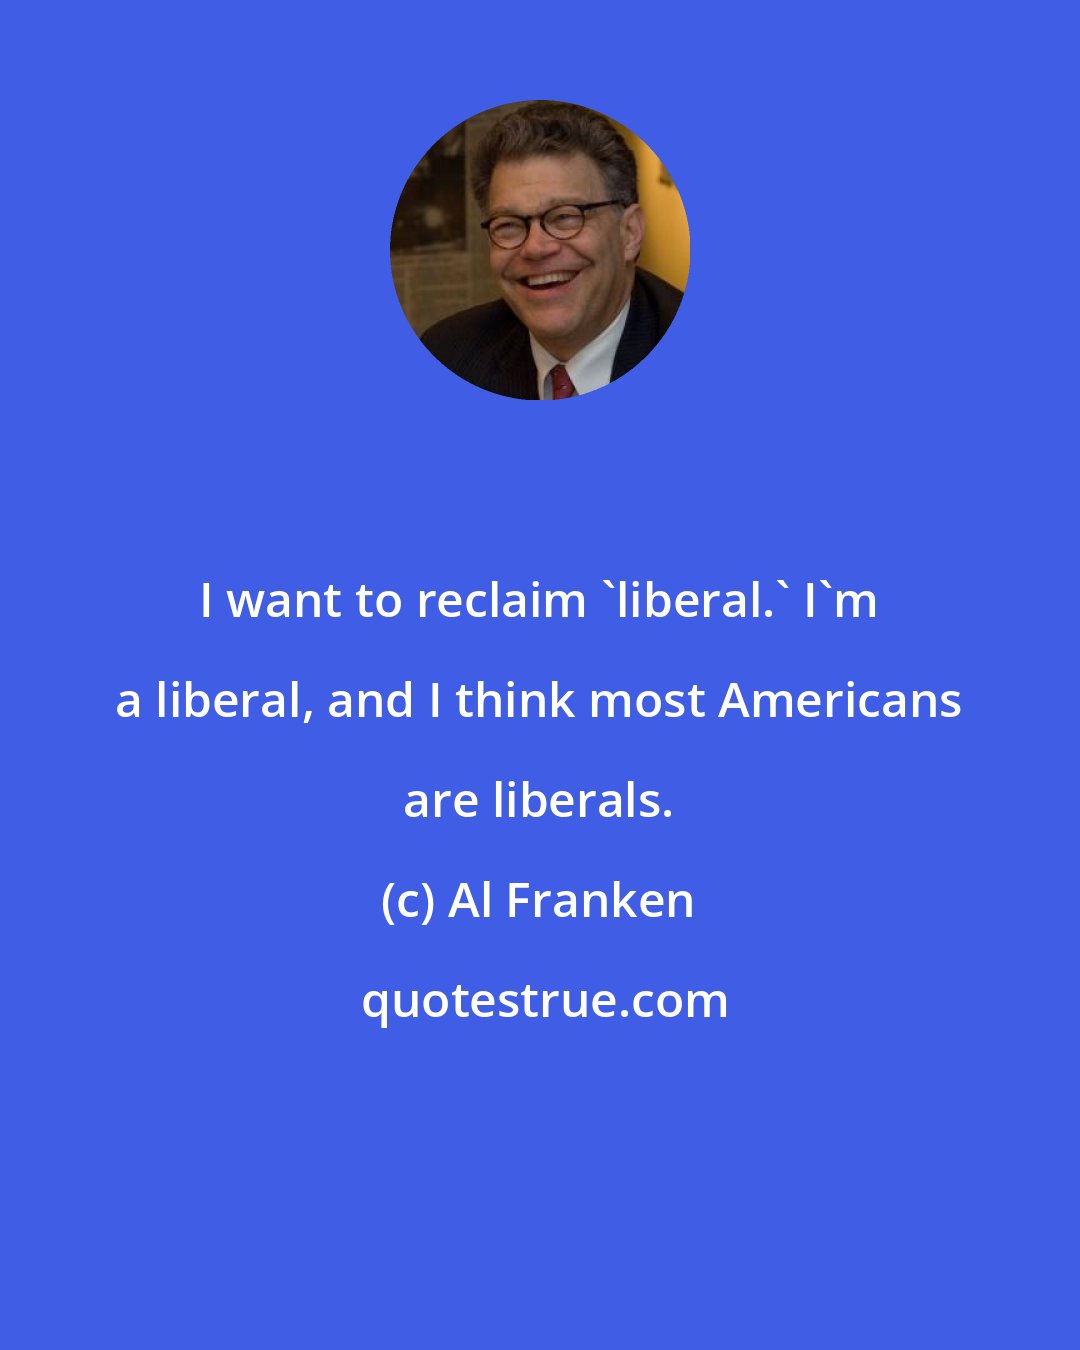 Al Franken: I want to reclaim 'liberal.' I'm a liberal, and I think most Americans are liberals.